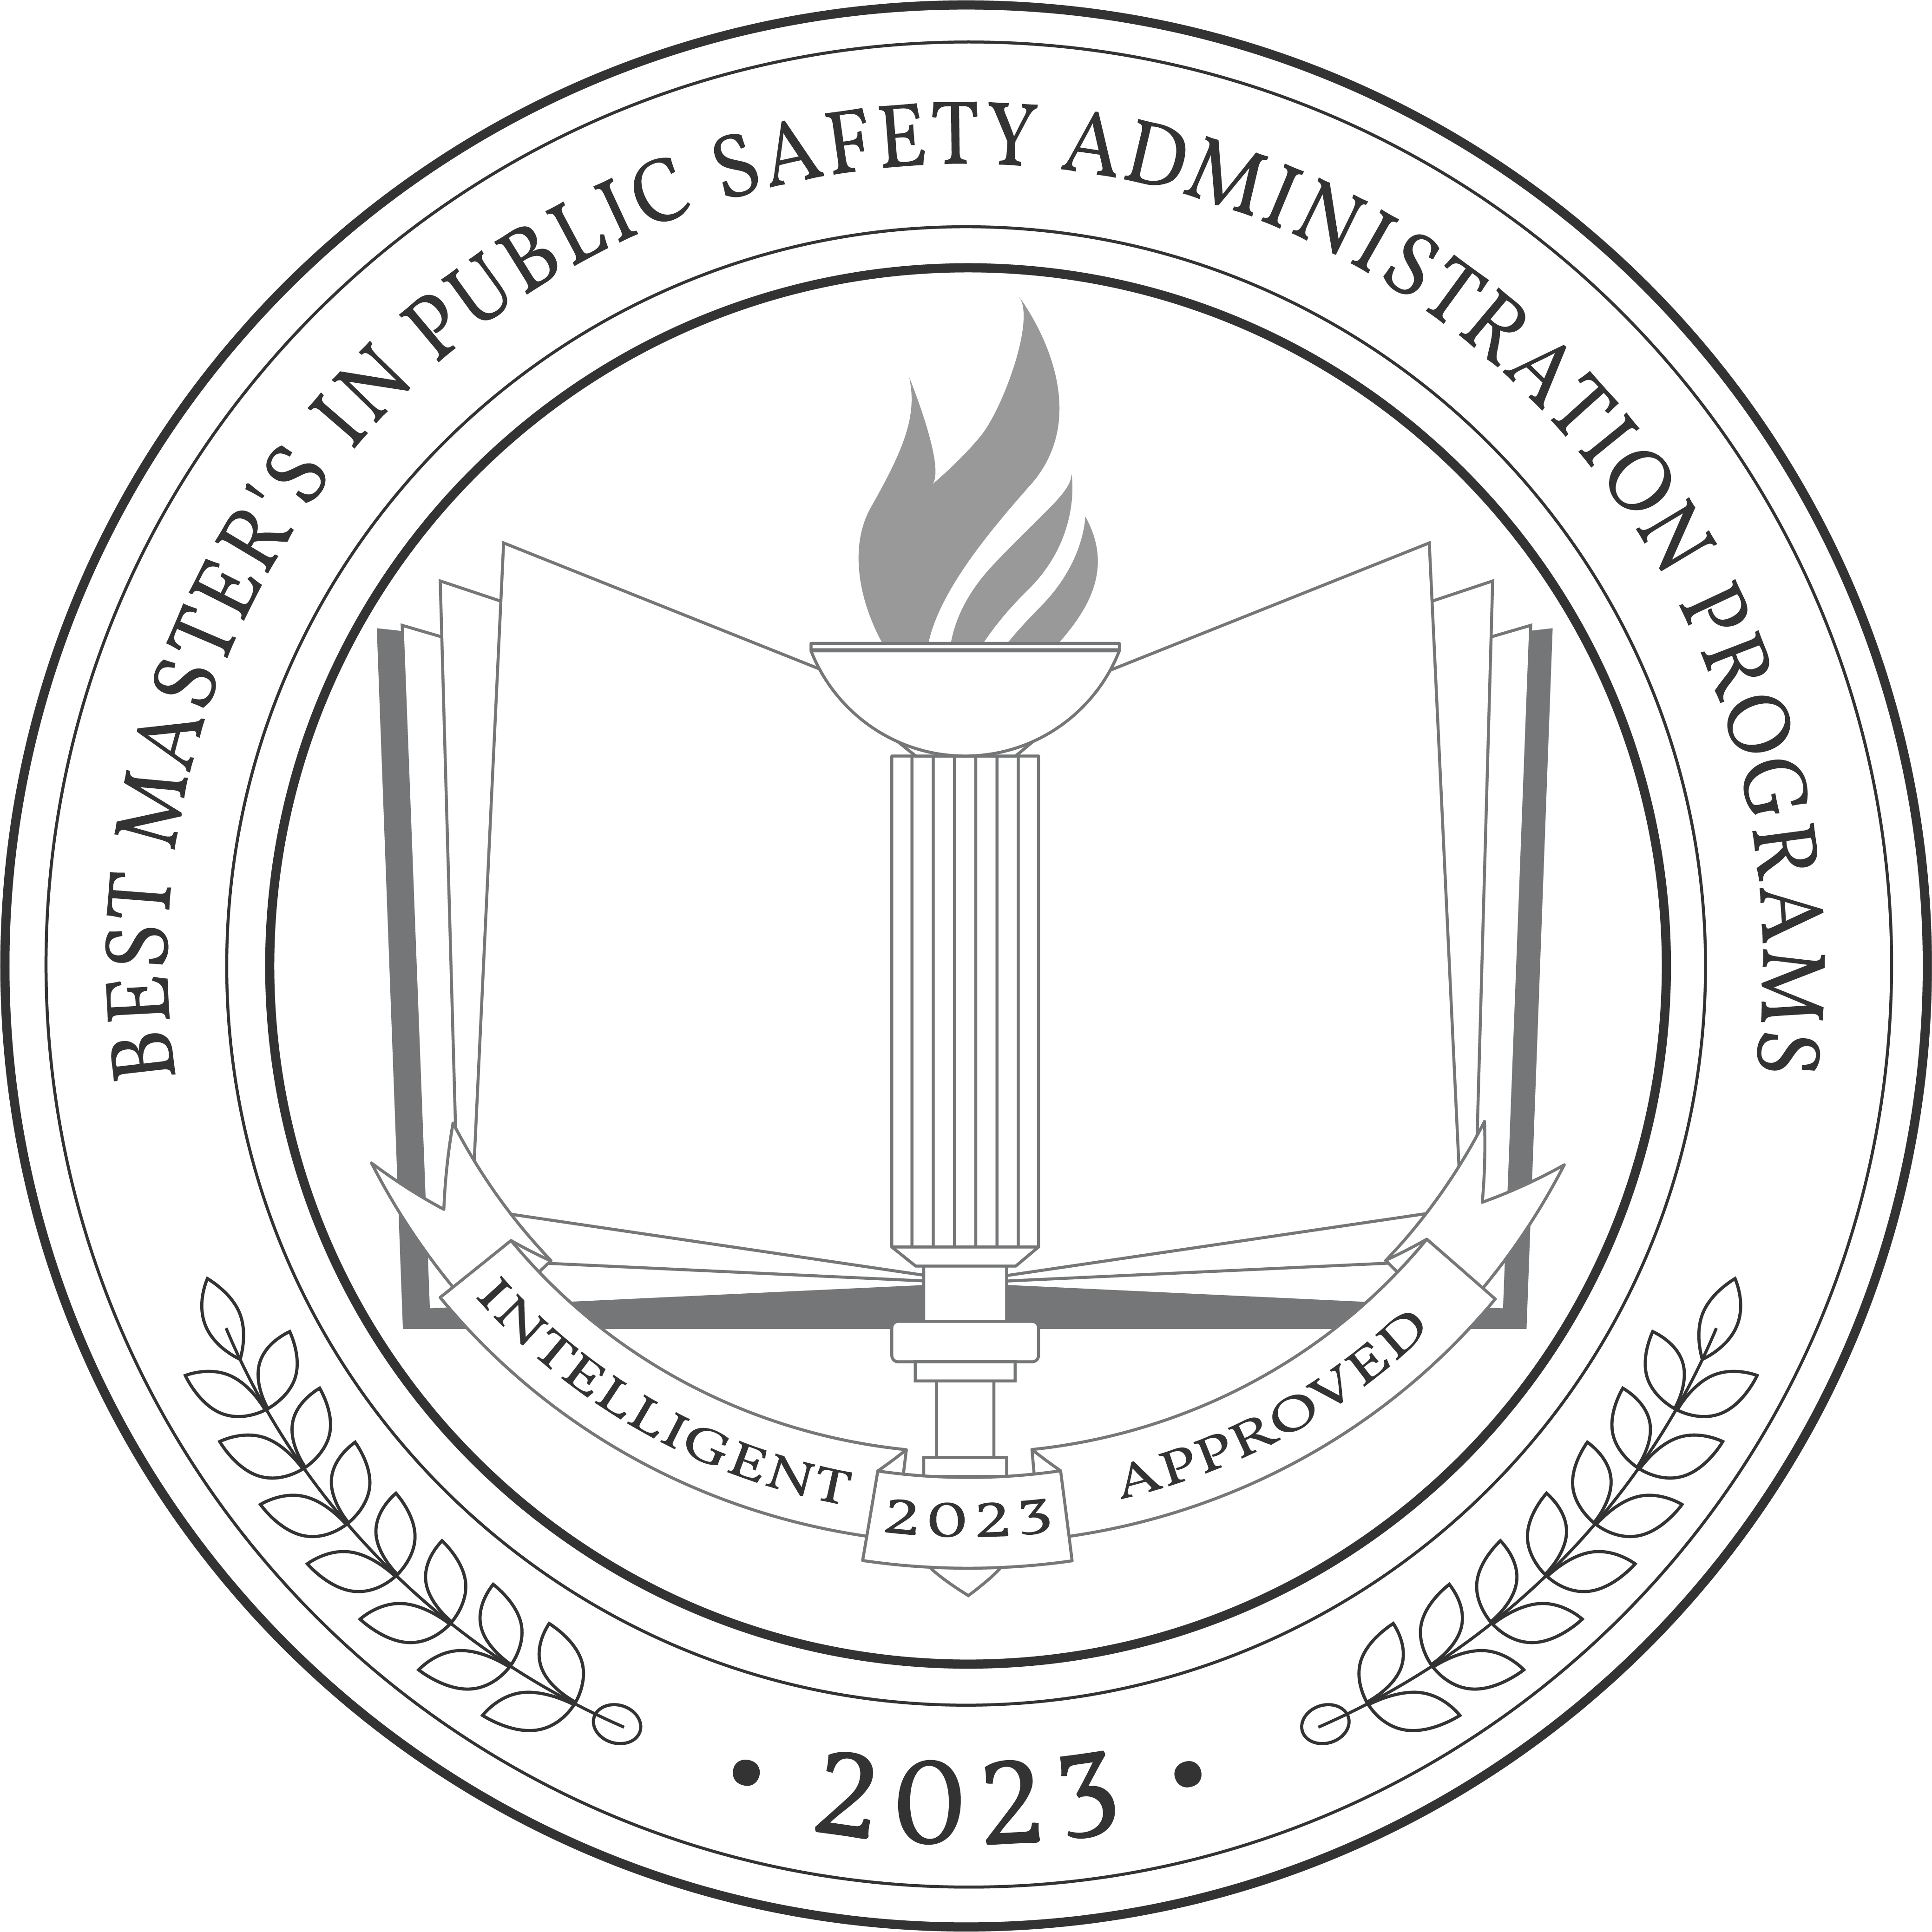 Best Master's in Public Safety Administration Programs badge